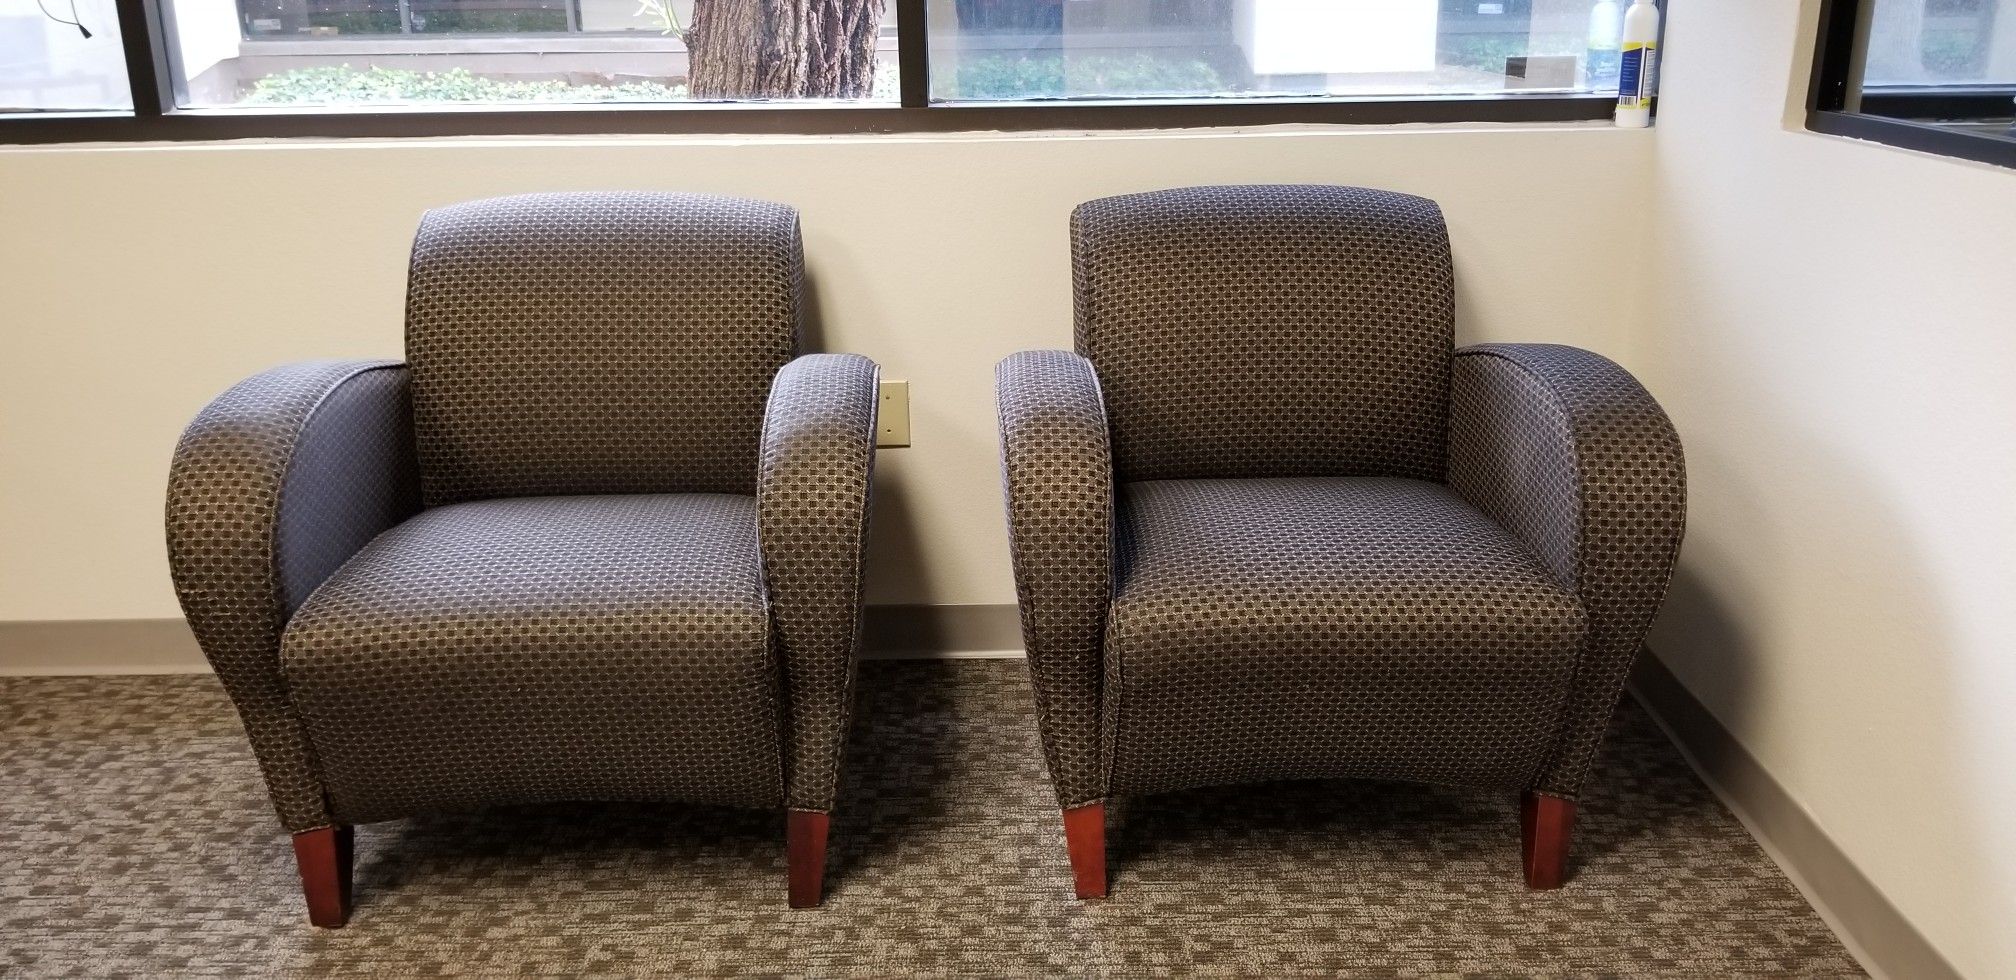 2 Executive Office Chairs